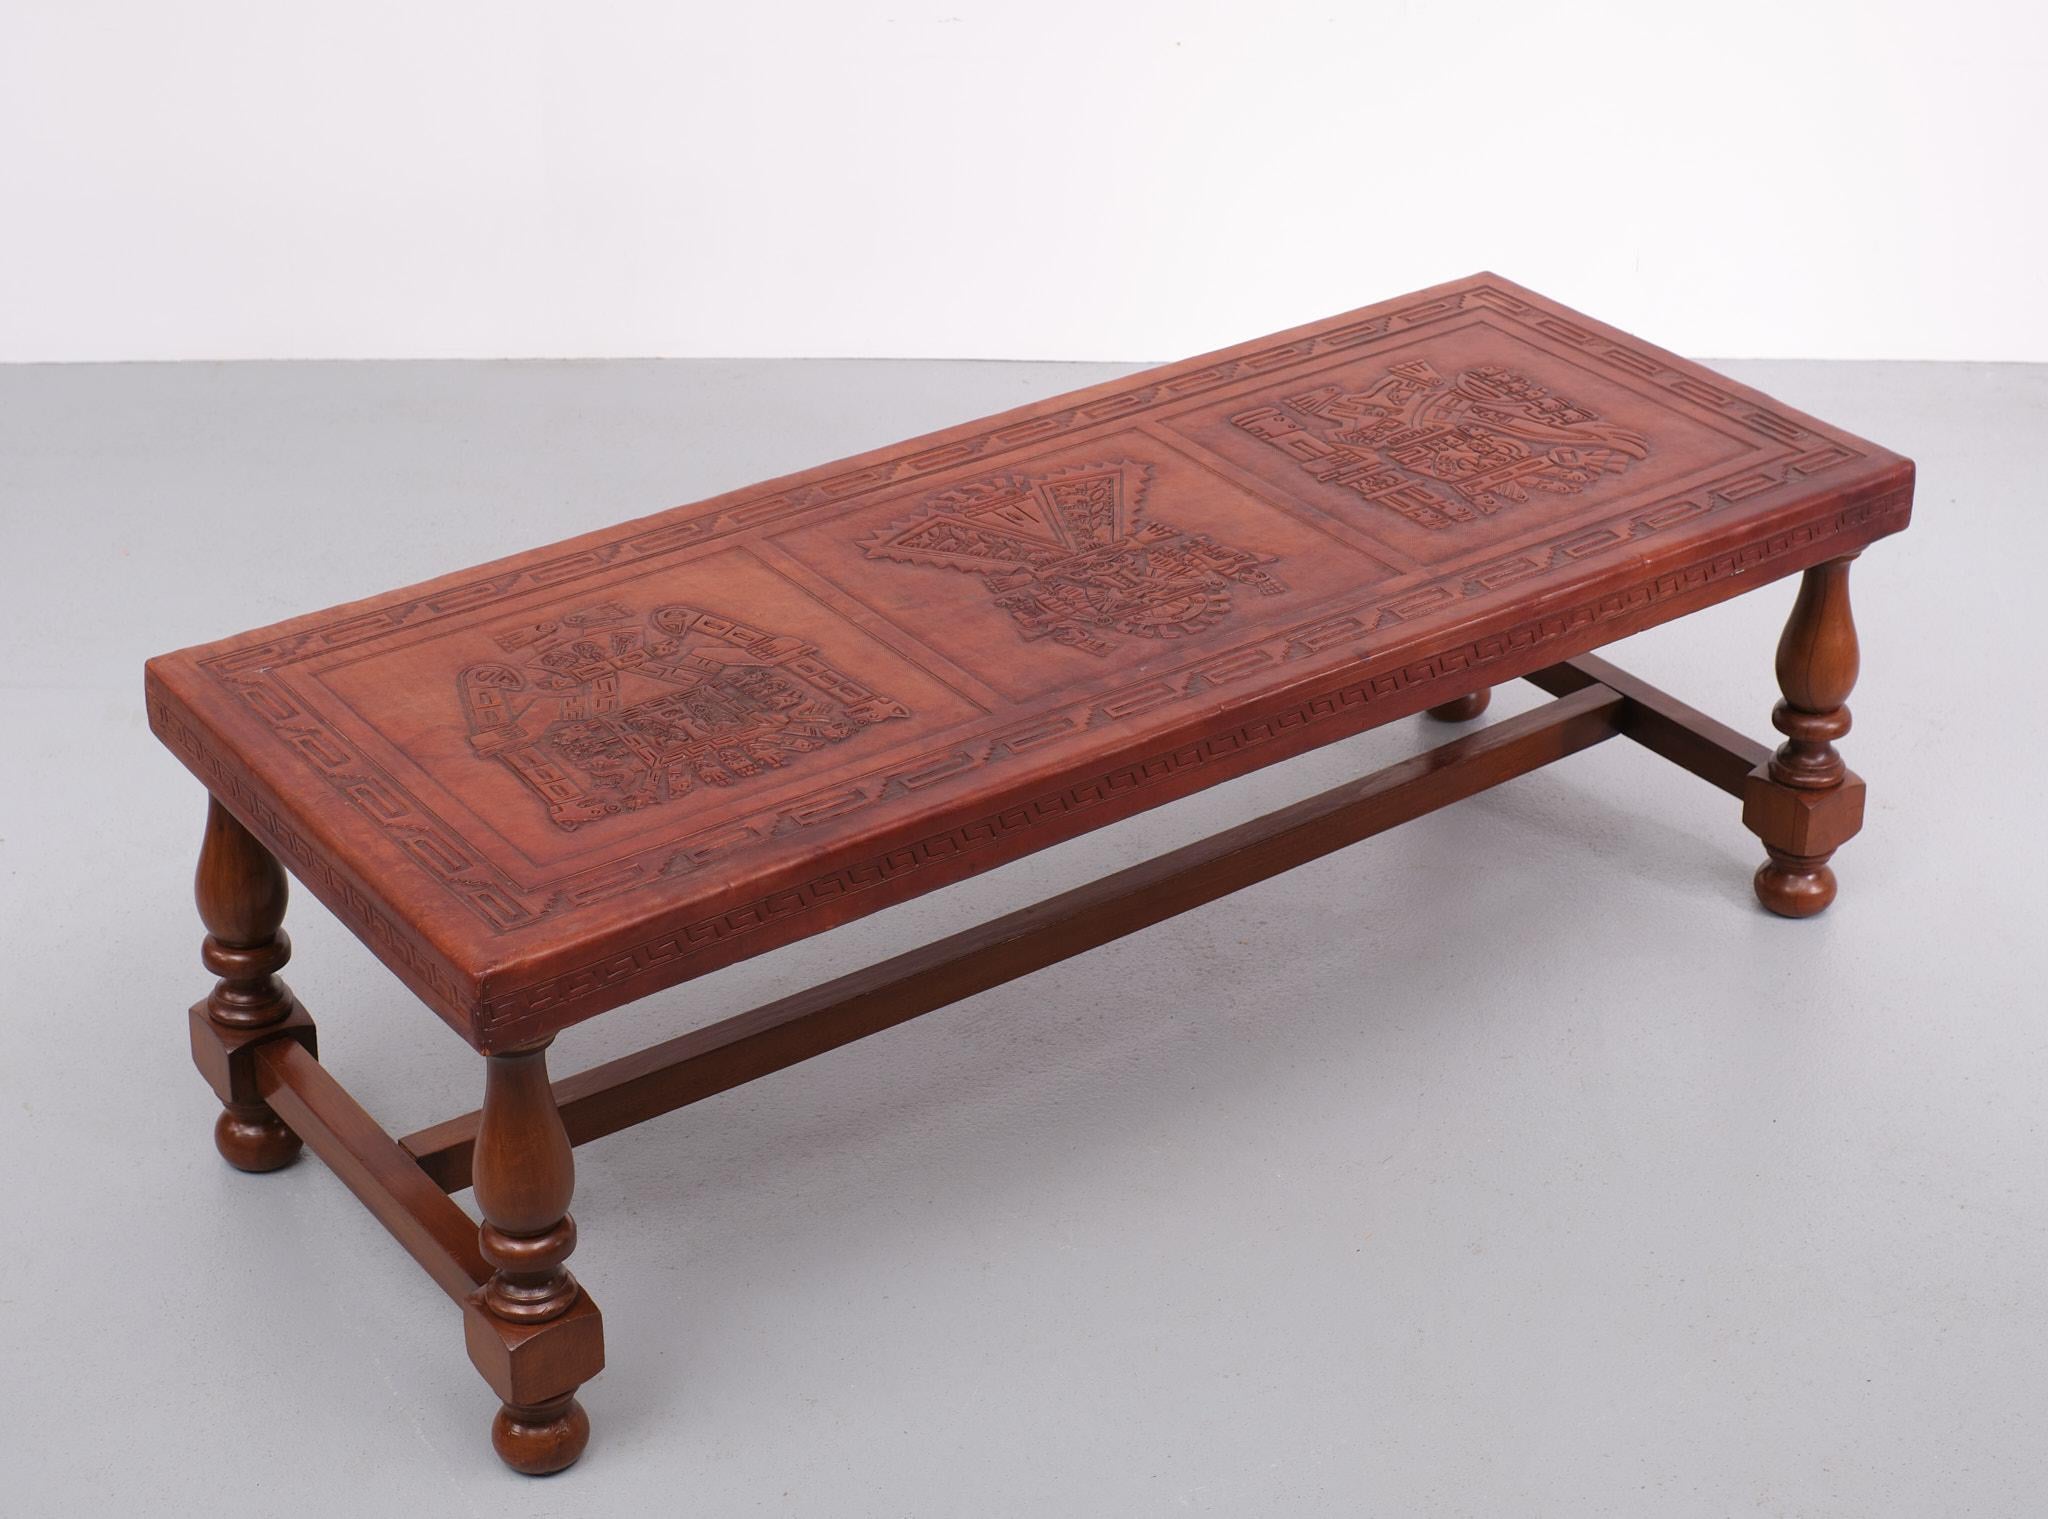 Three pre-Inca figures grace this coffee table, handcrafted by Abel Rios. Inspired by the rich cultural heritage of his native Peru, Rios skillfully embosses leather using traditional tools and exceptional creativity. This elegant mohena wood table